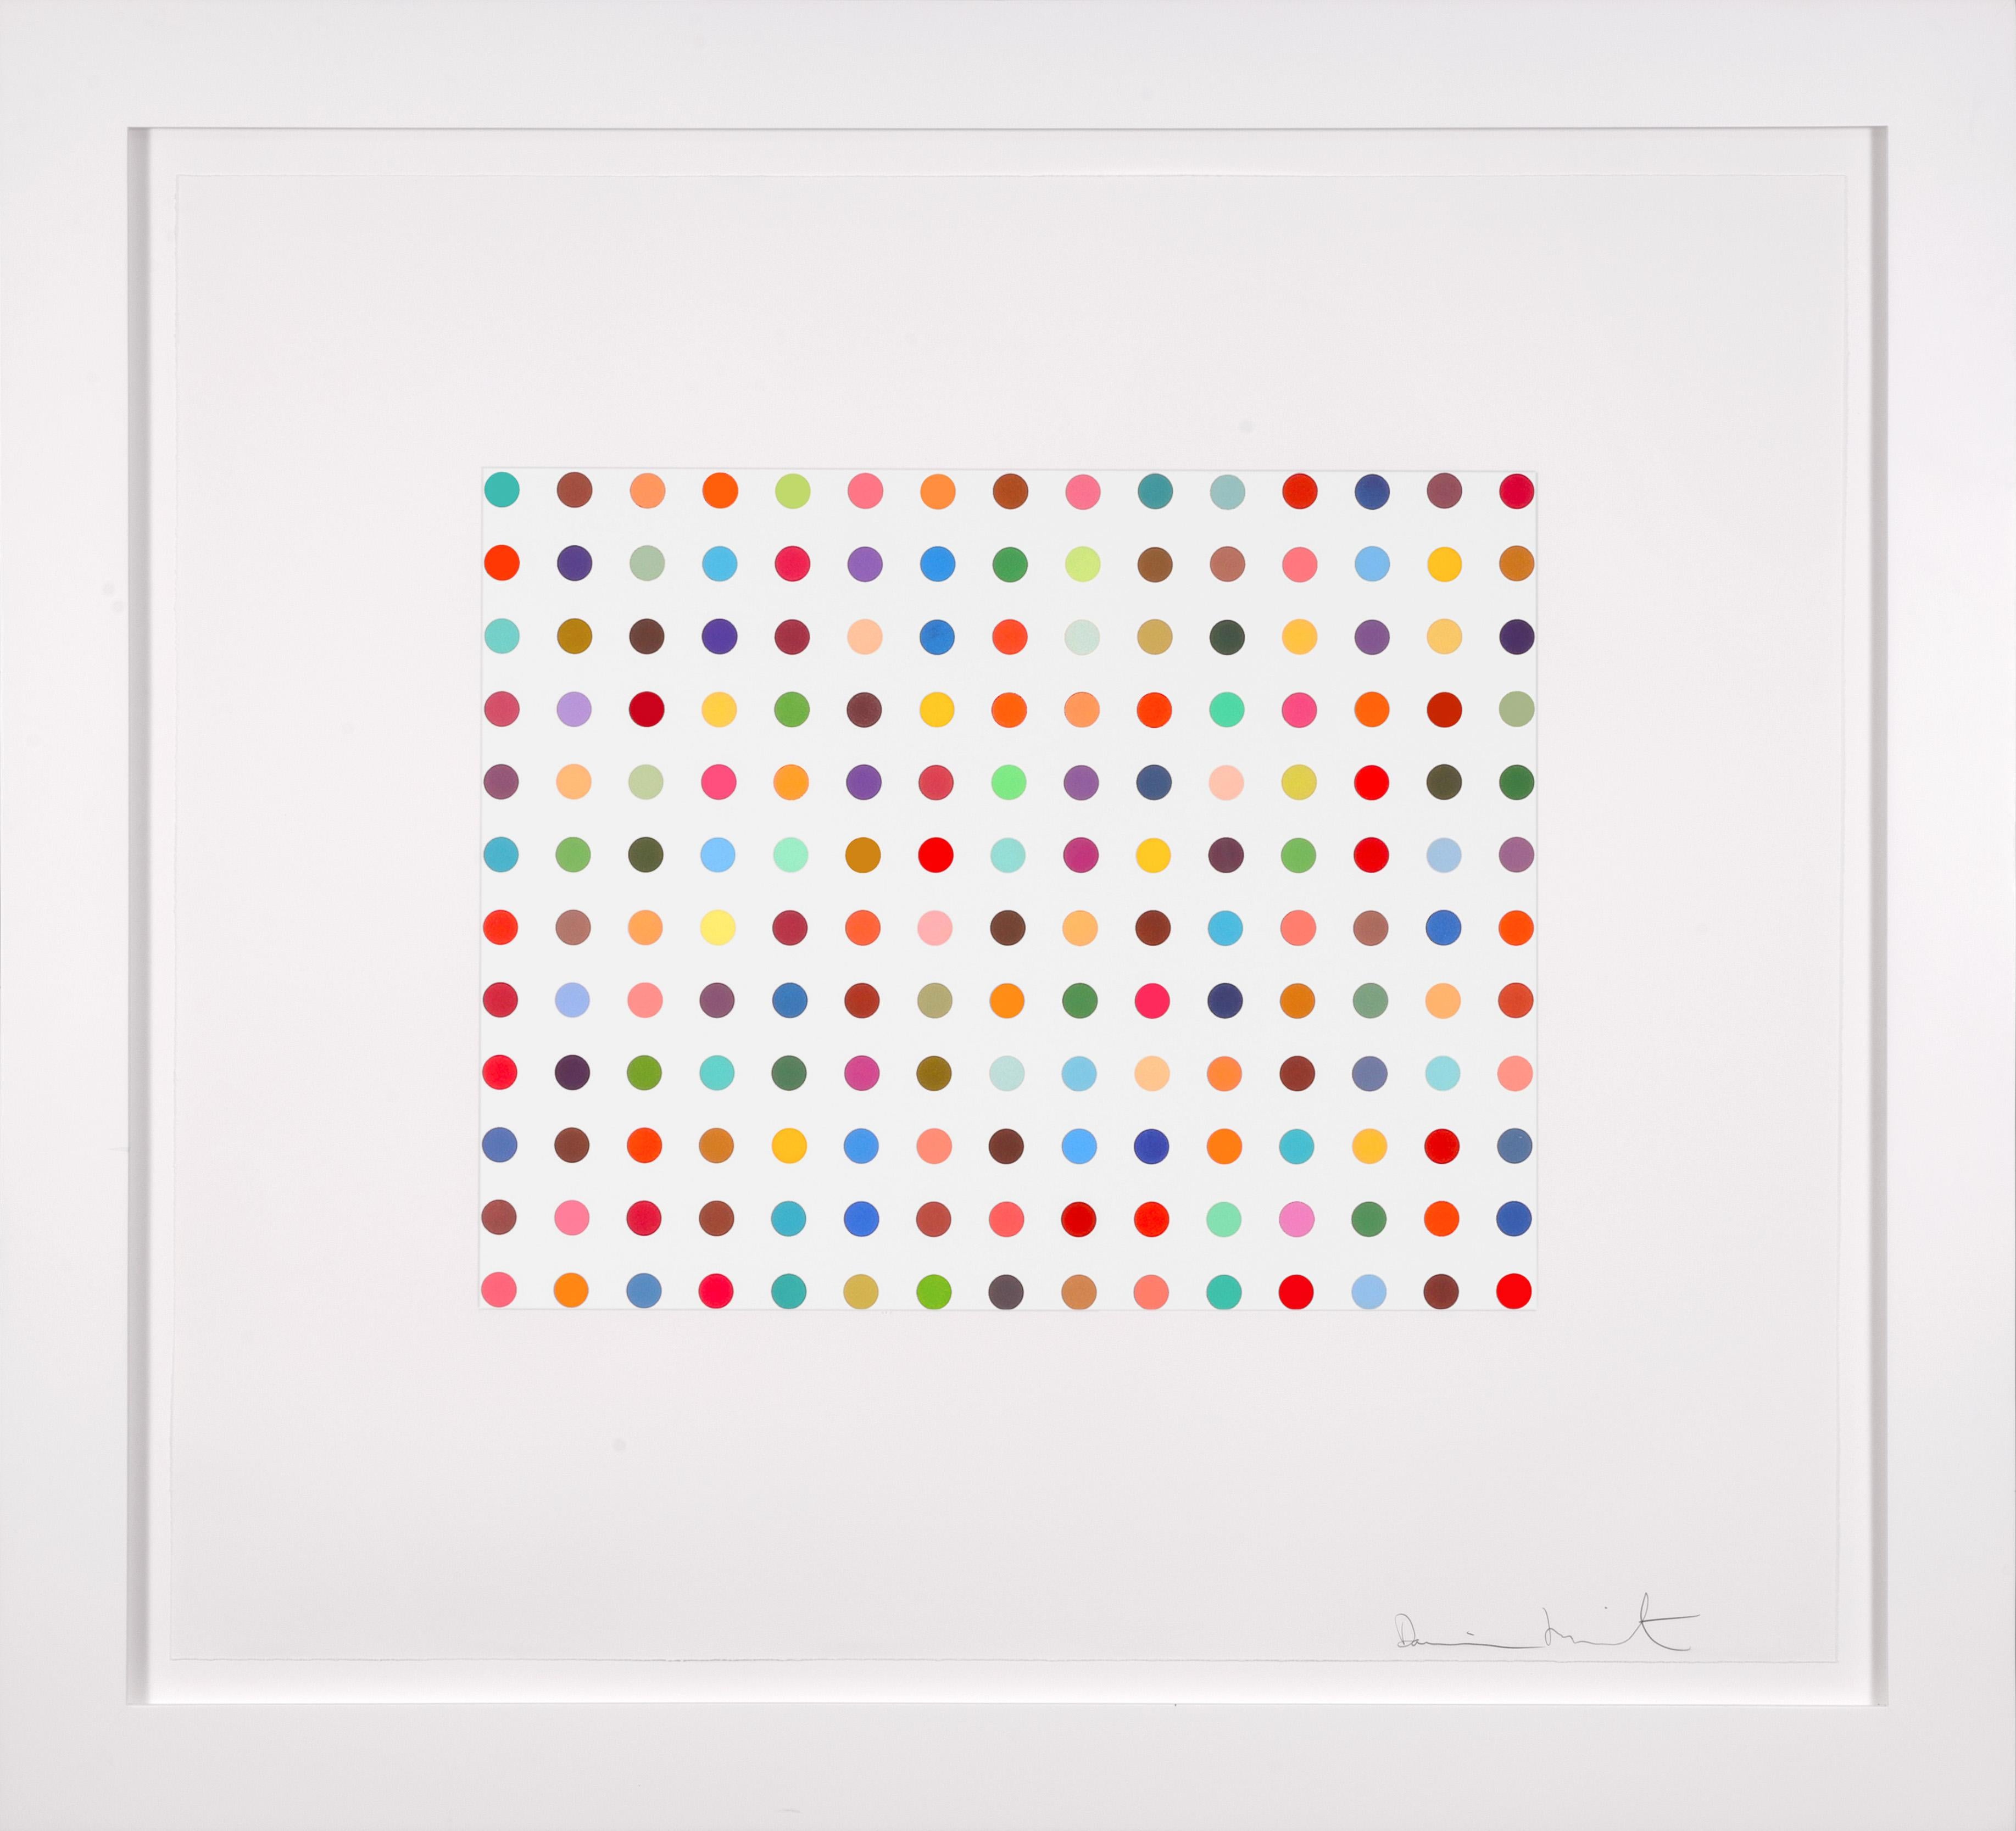 Damien Hirst 'Pyronin Y' Limited Edition Spots Etching on Hahnemühle paper, with full margins. Edition of 65 + 20 AP, numbered on verso, AP. Signed by the Artist on front. Published by the Paragon Press, London. This framed etching was created in